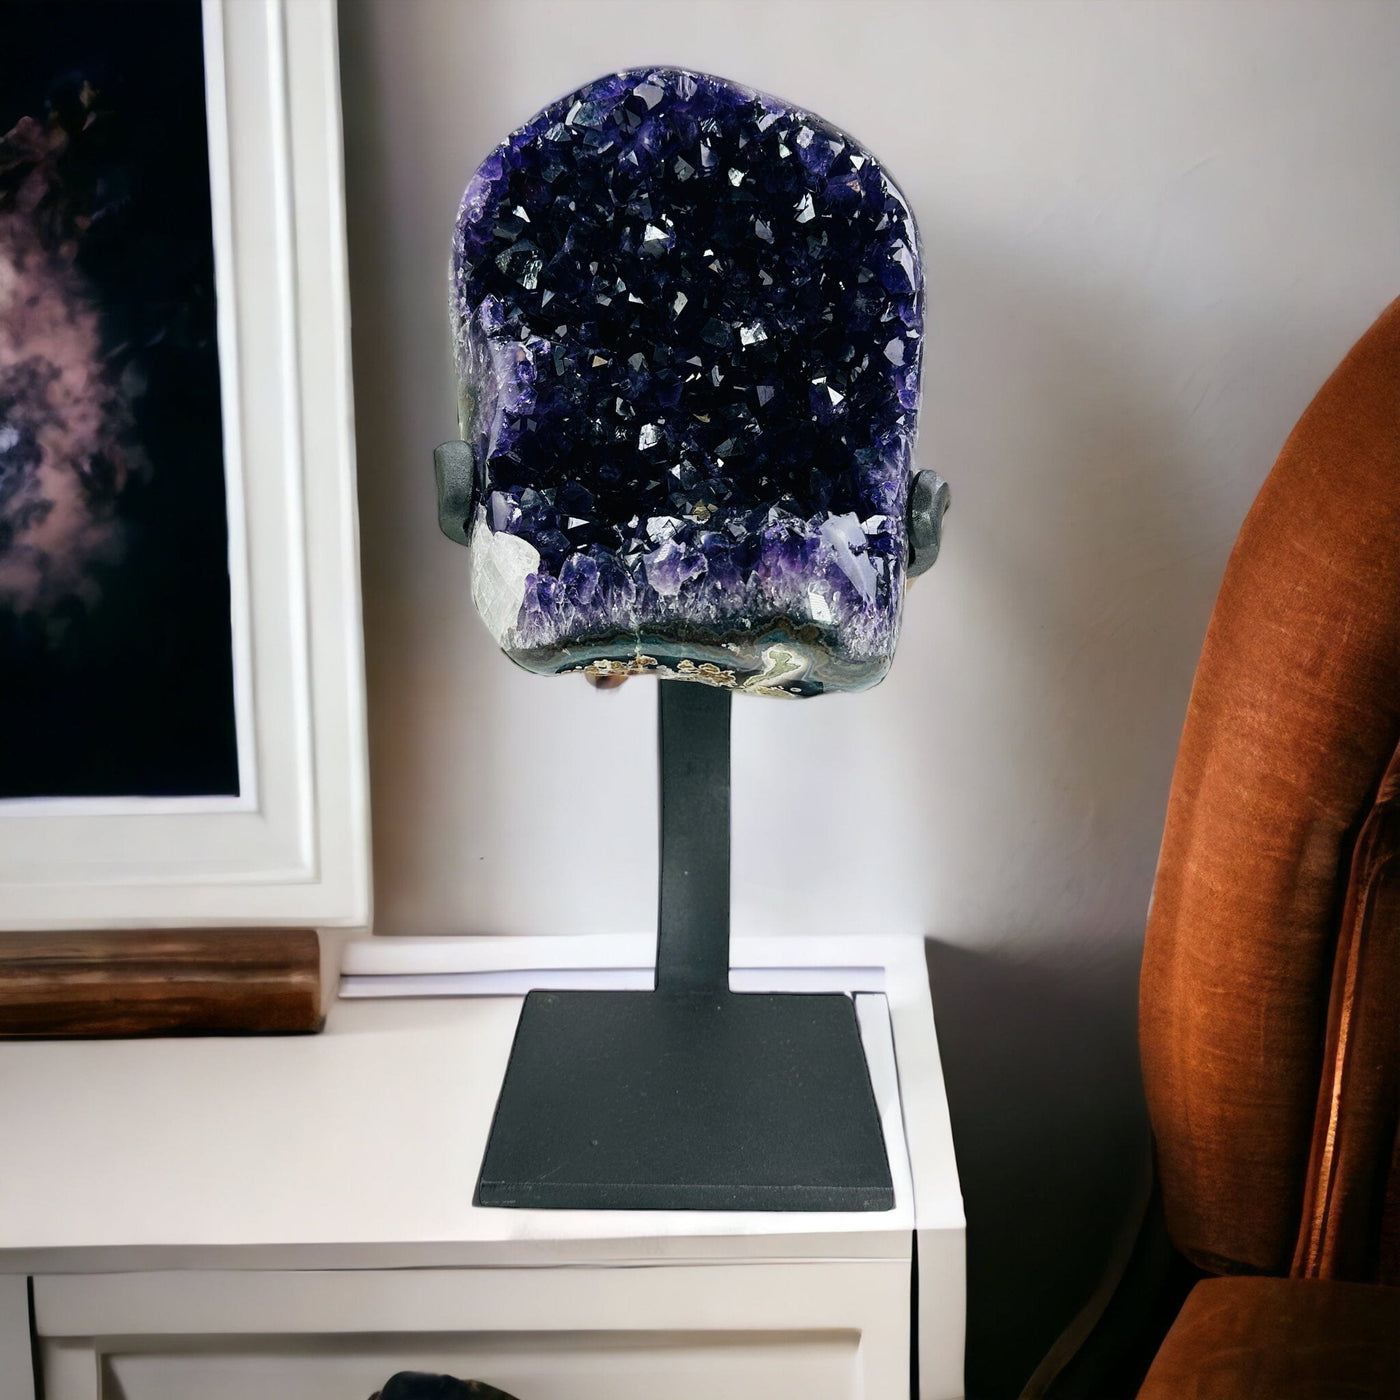 amethyst on stand with decorations in the background